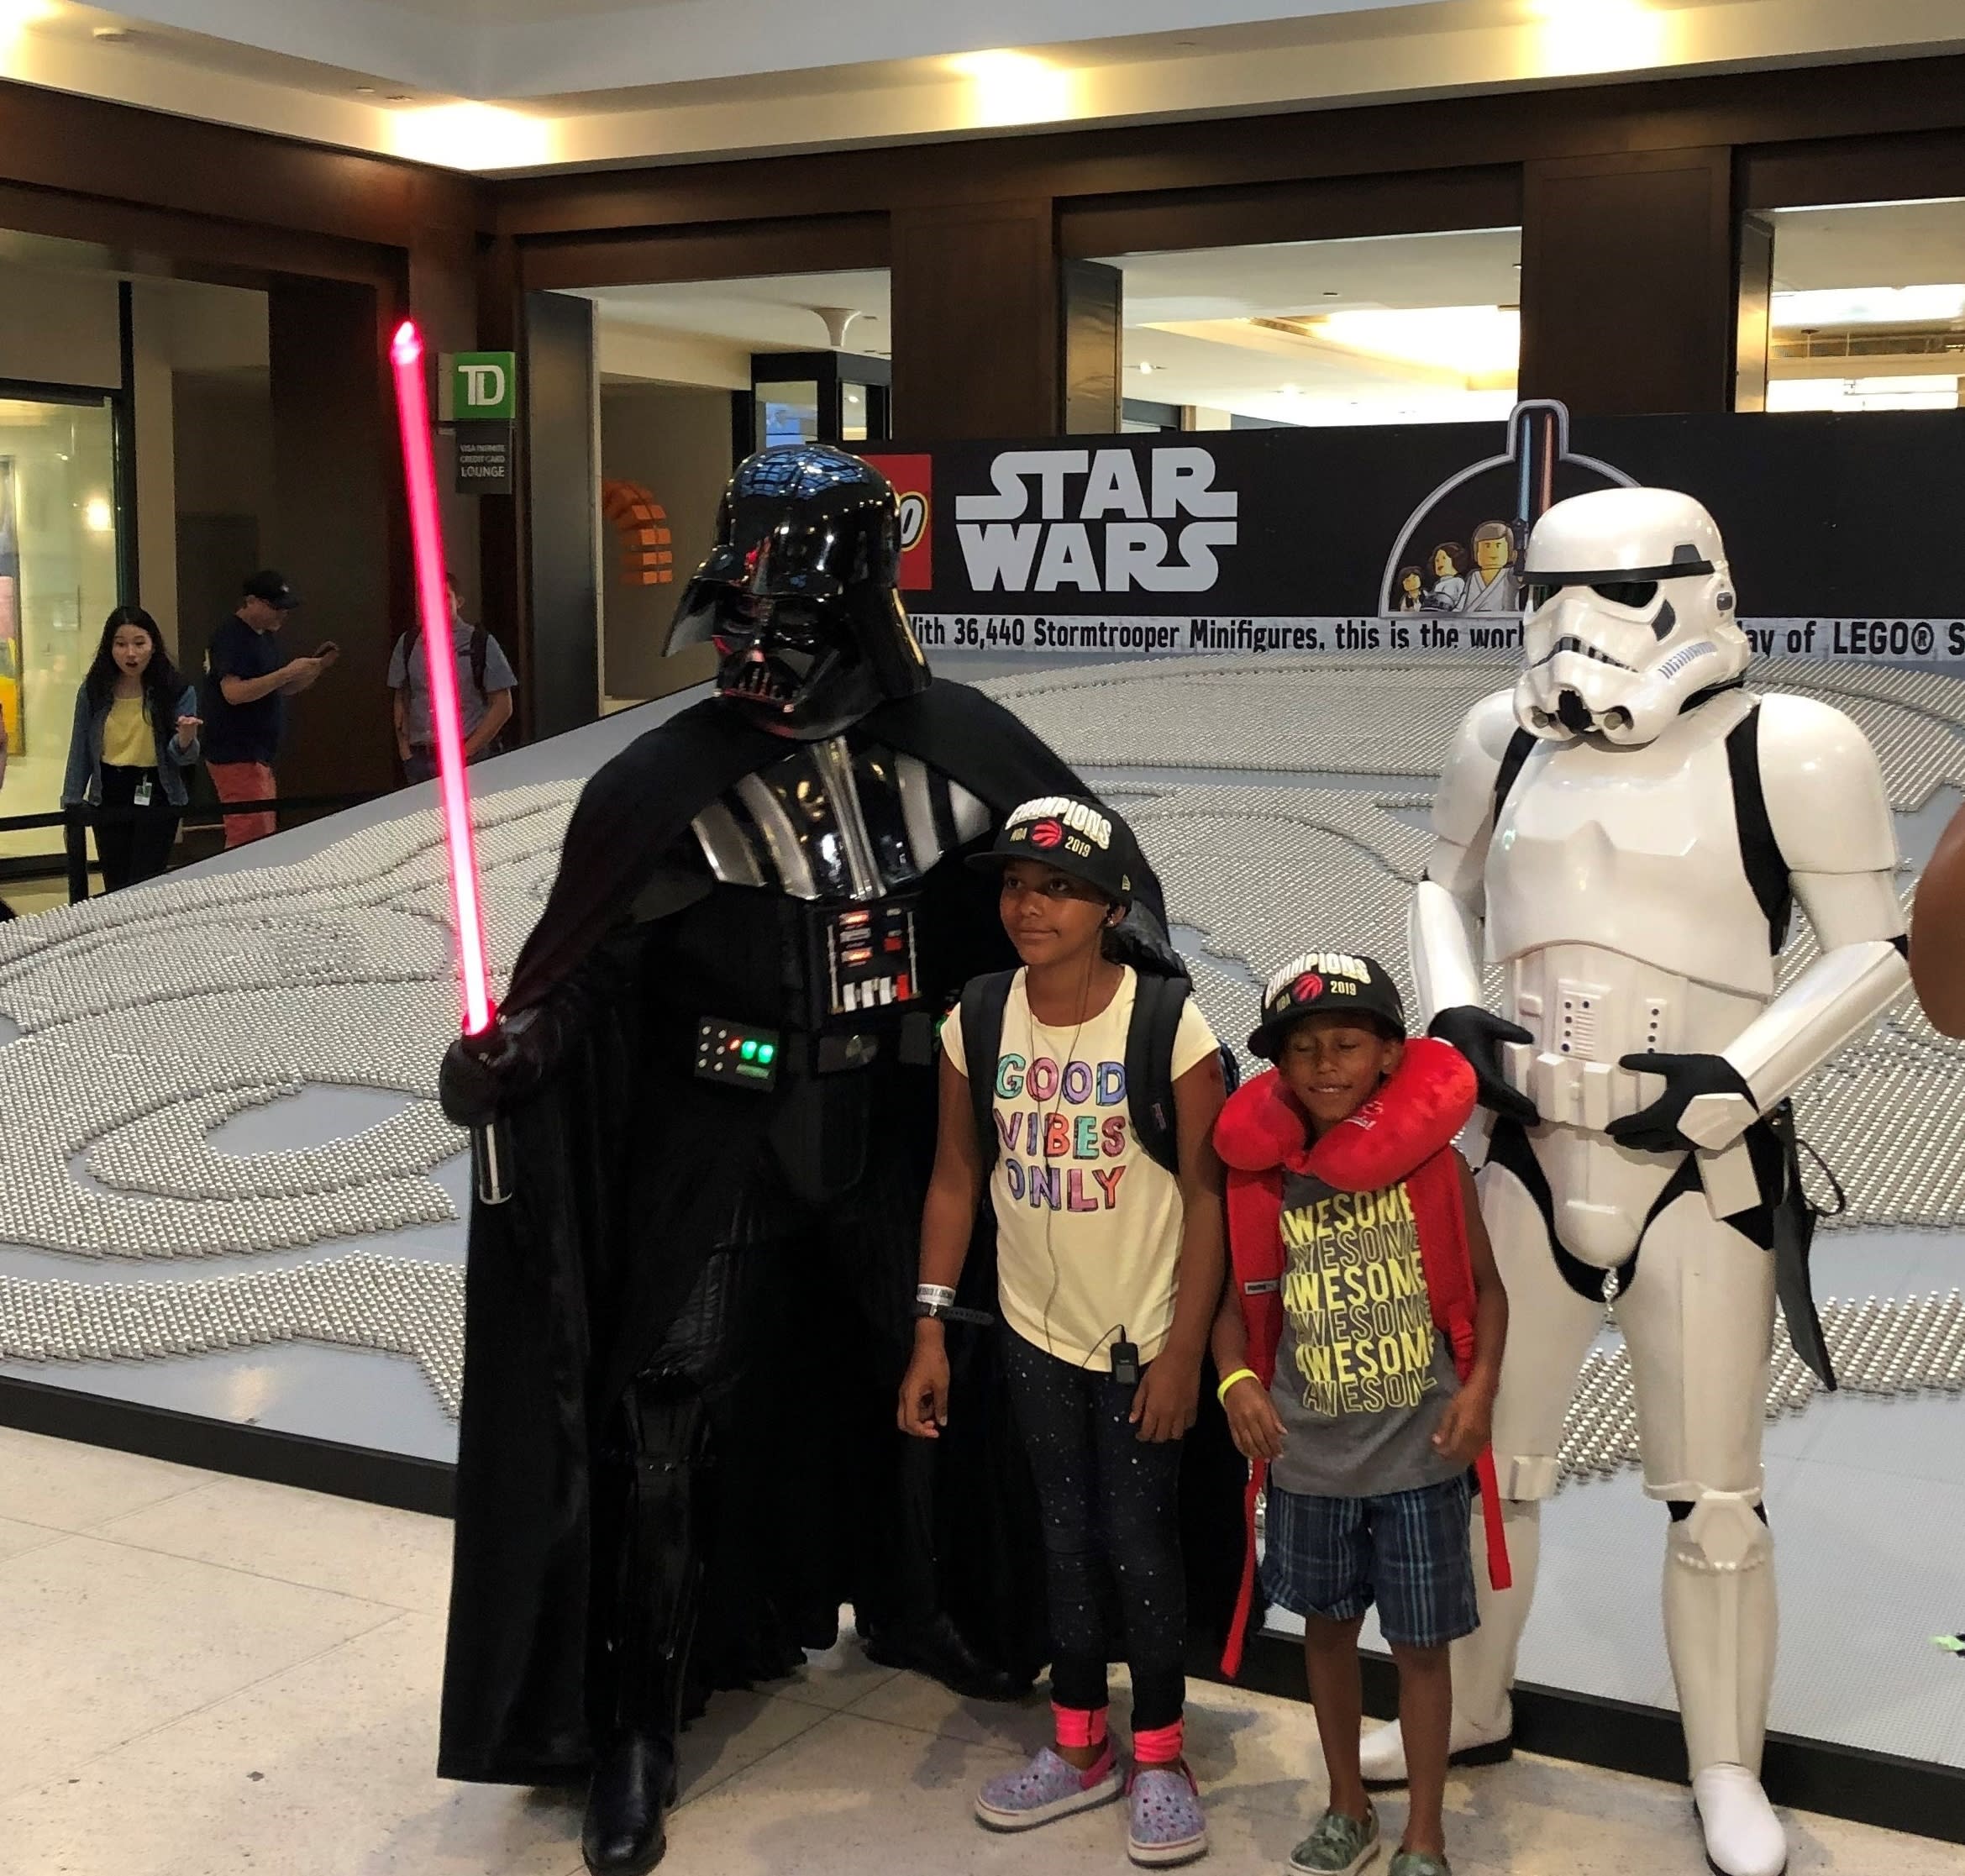 Children stand next to Star Wars characters.